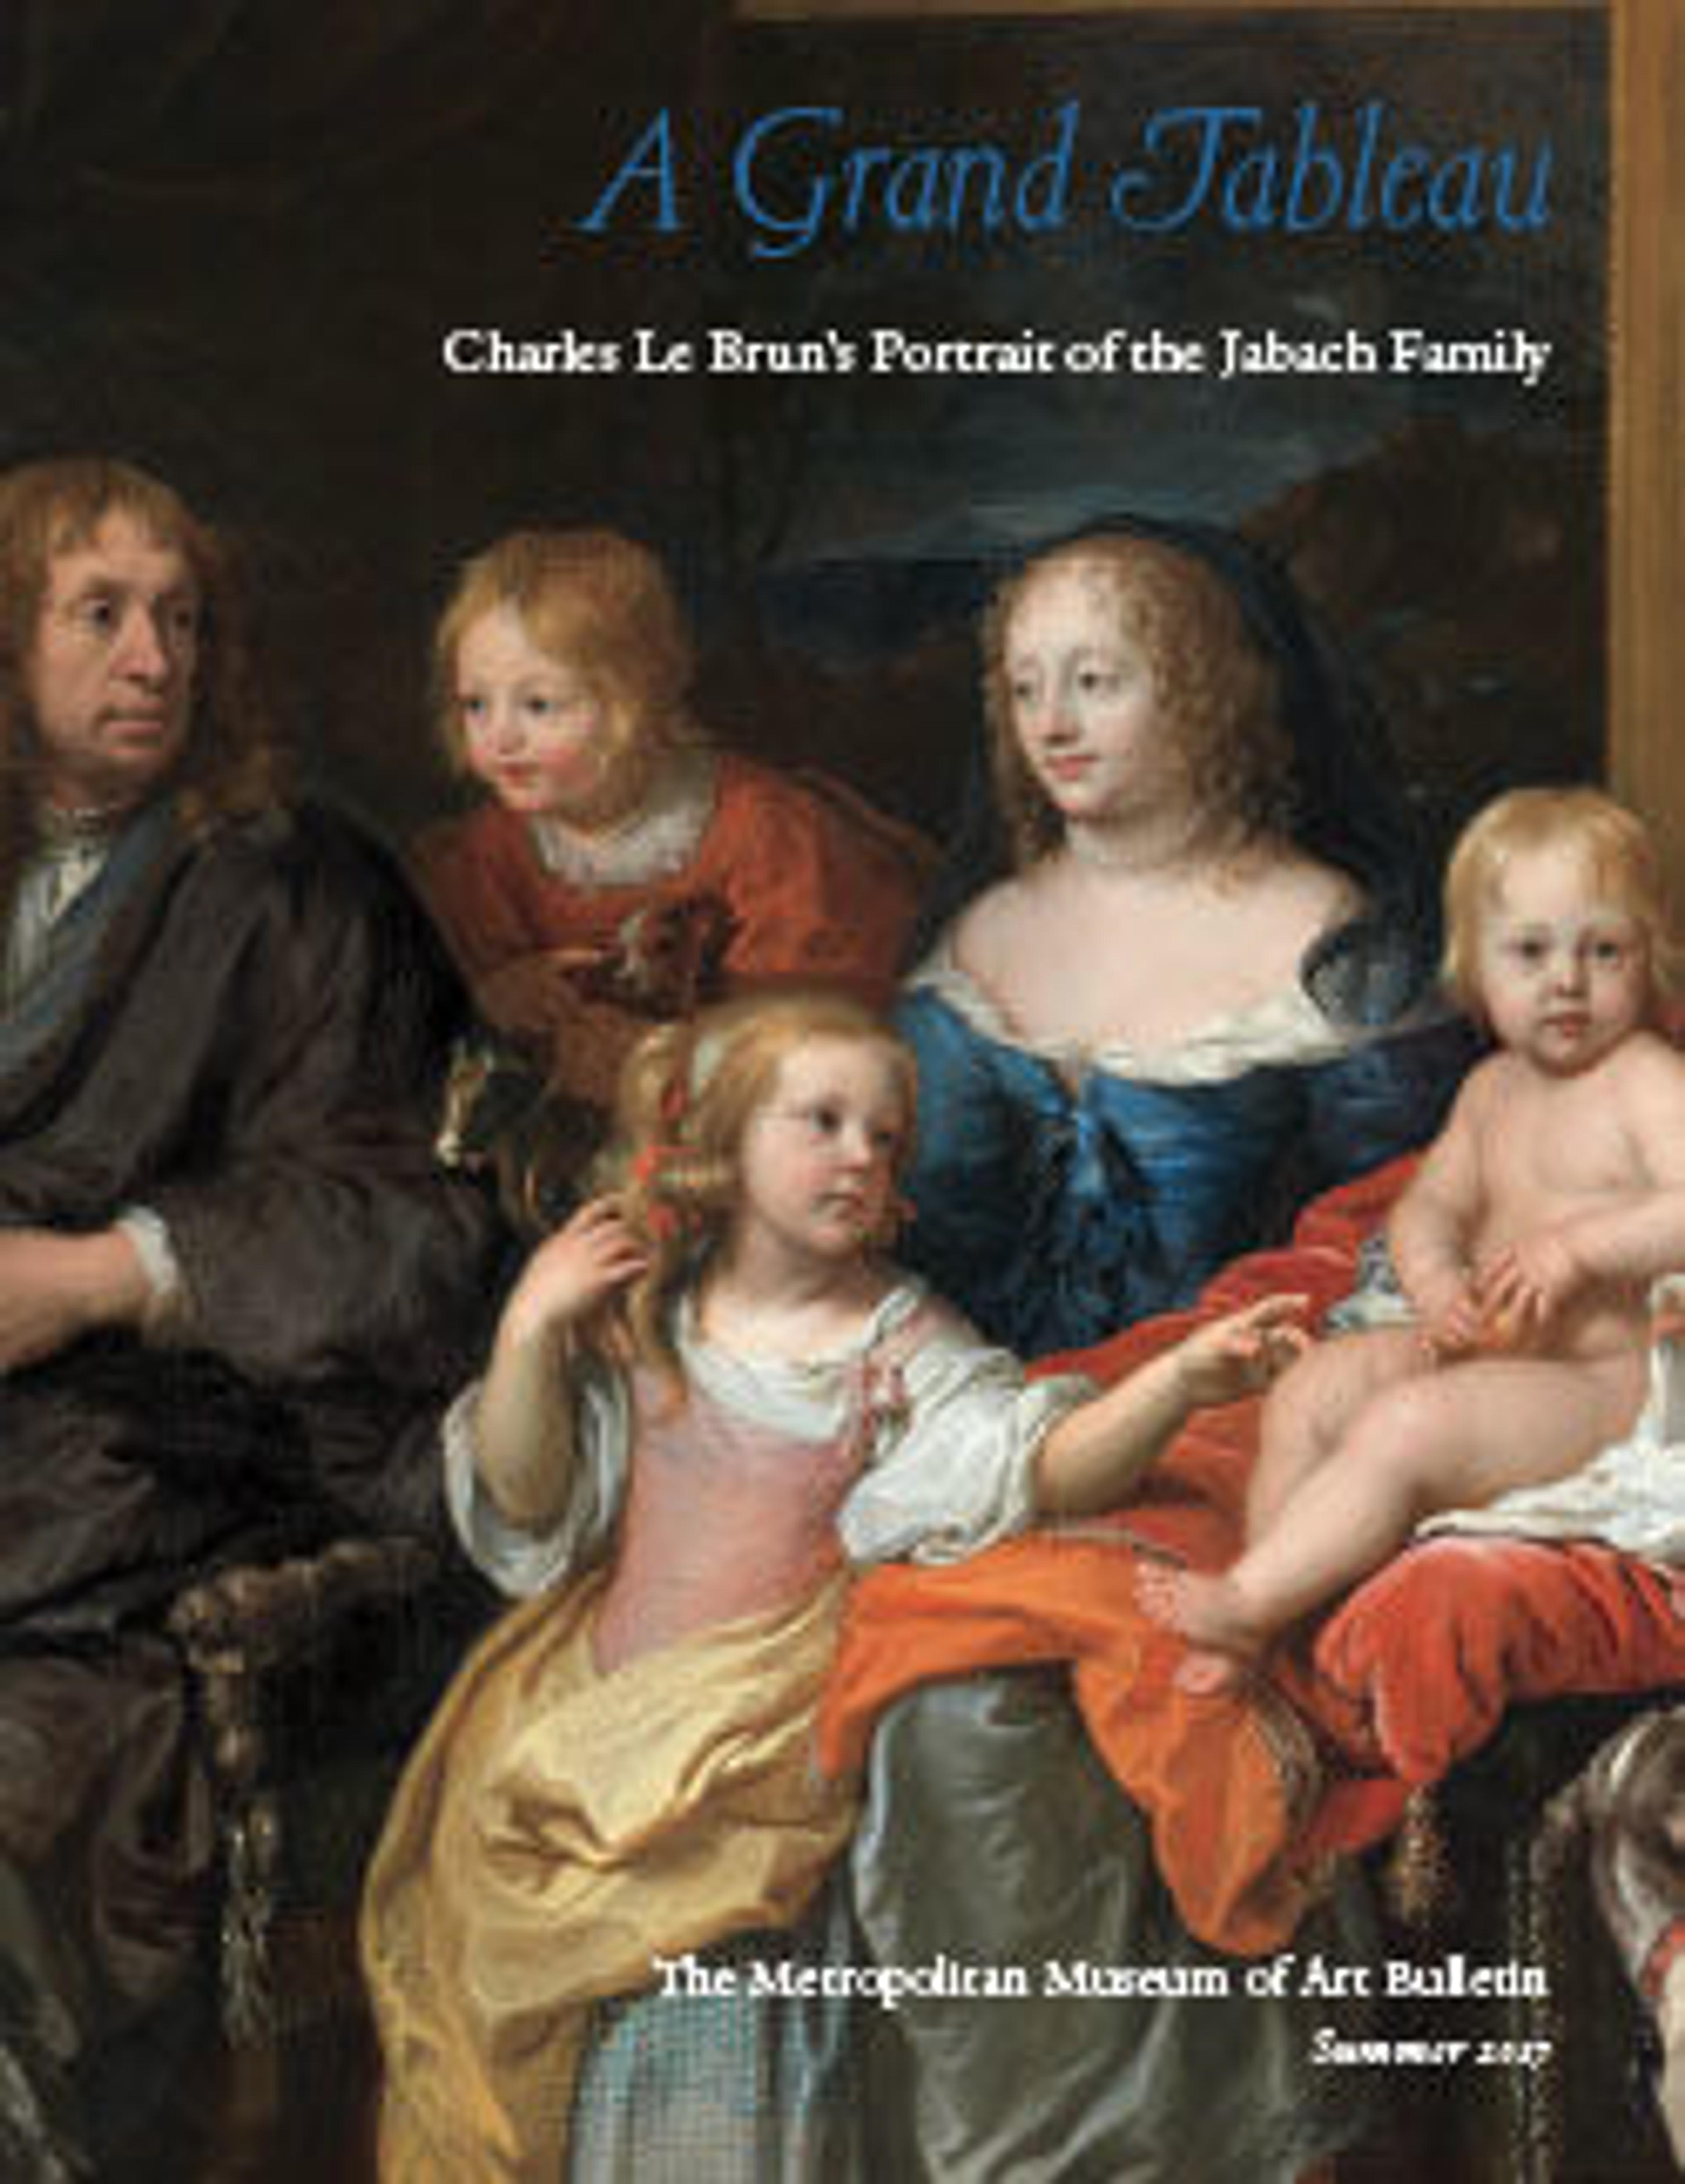 A Grand Tableau: Charles Le Brun’s Portrait of the Jabach Family